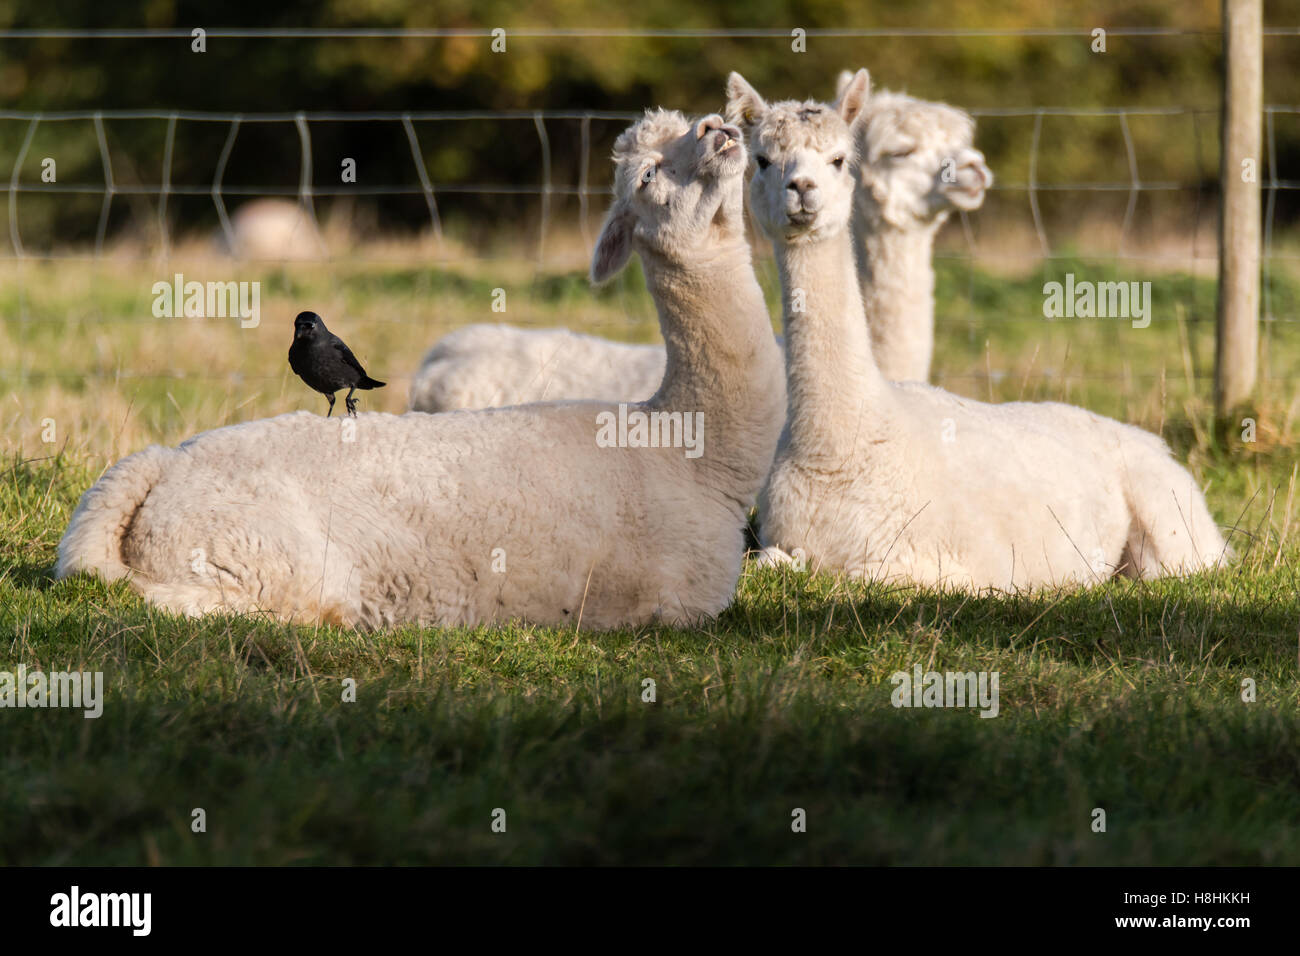 Jackdaw (Corvus monedula) standing on alpaca. Small crow in the family Corvidae resting on back of white alpaca in English field Stock Photo